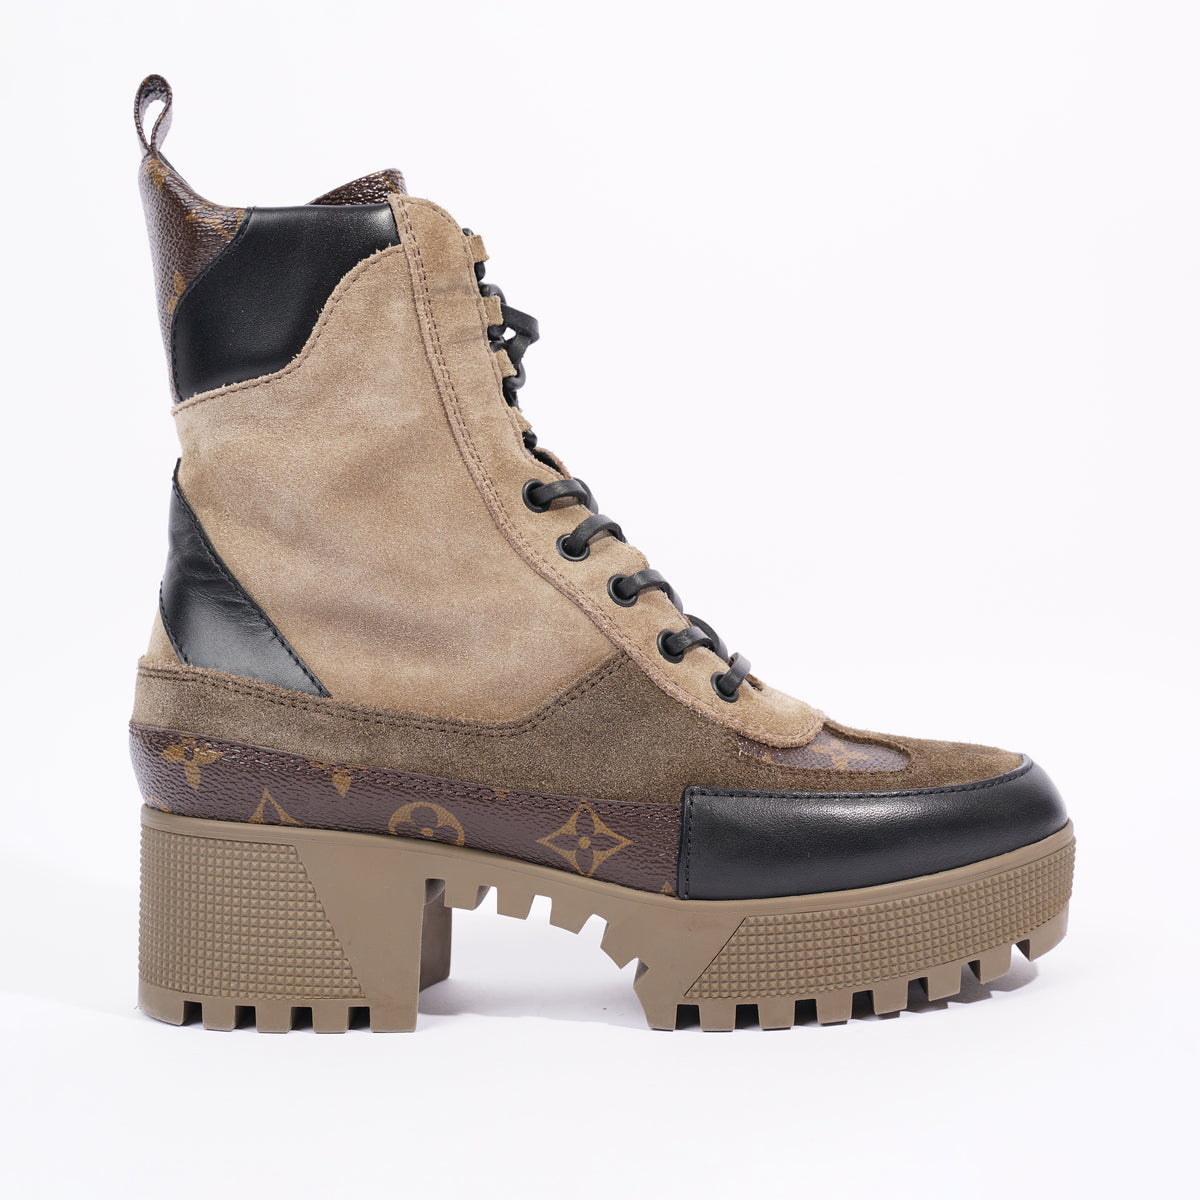 Making Louis Vuitton Inspired Star Trail Boots 